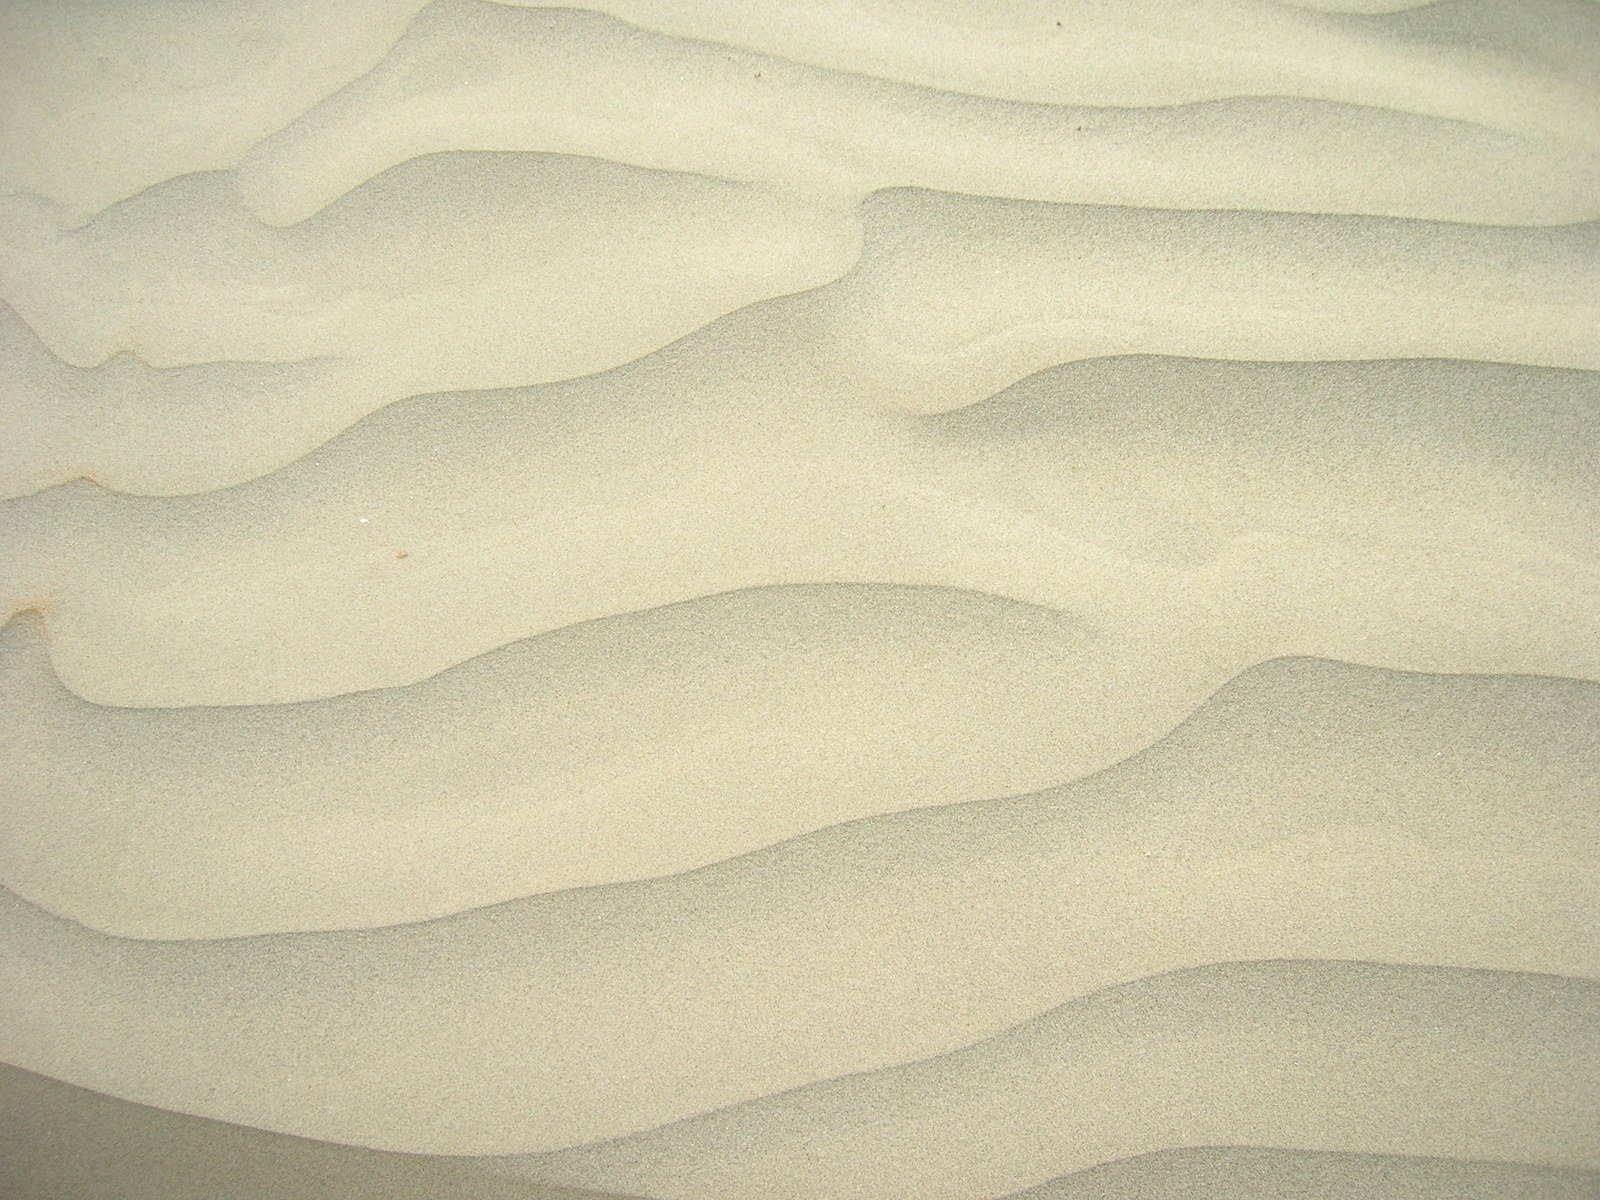 an empty beach with many dunes and water